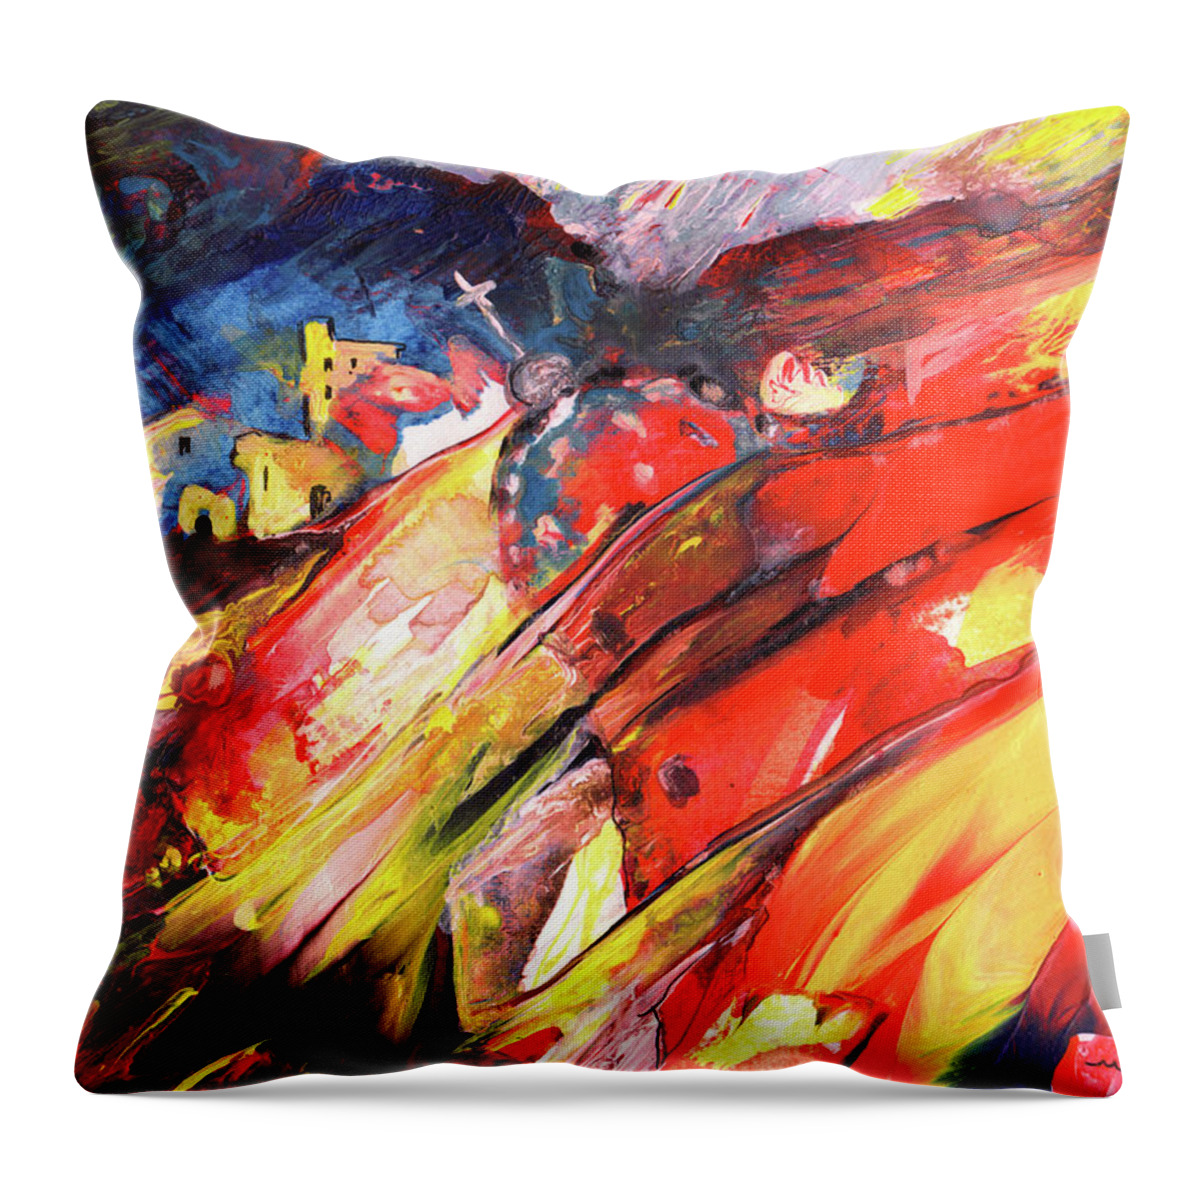 Impression Throw Pillow featuring the painting Dream Village 01 by Miki De Goodaboom